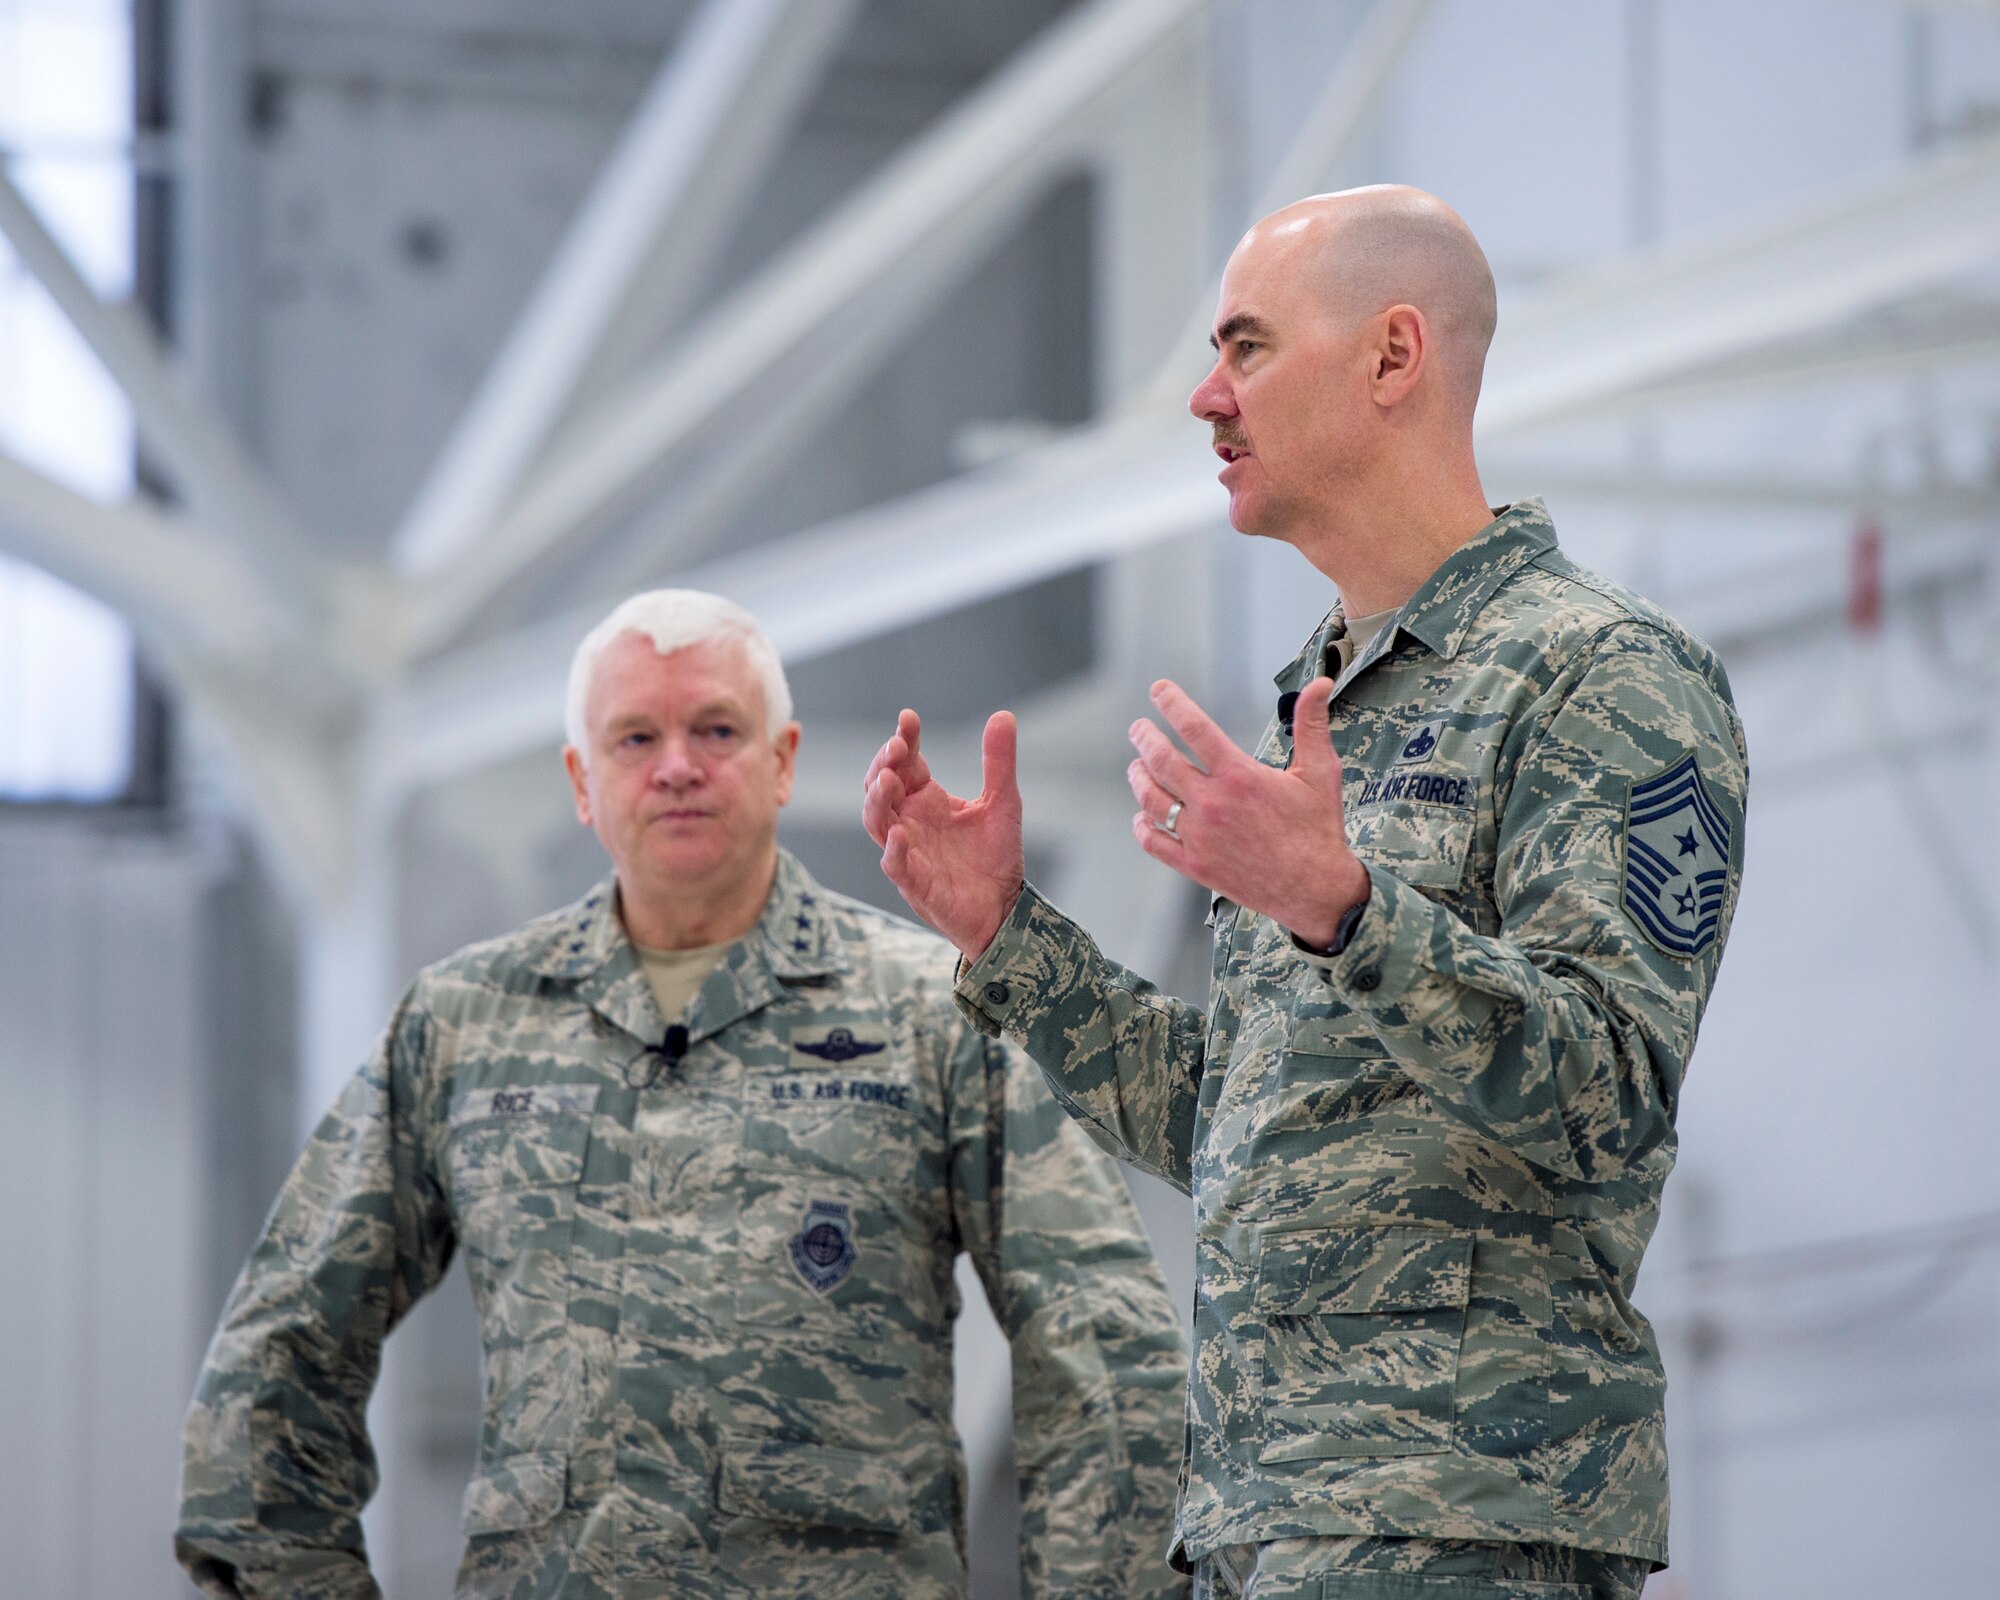 U.S. Air Force Lt. Gen. L. Scott Rice, director, Air National Guard, and Chief Master Sgt. Ronald Anderson, right, Command Chief of the Air National Guard answered questions from members of the 133rd Airlift Wing in St. Paul, Minn., March 25, 2018.